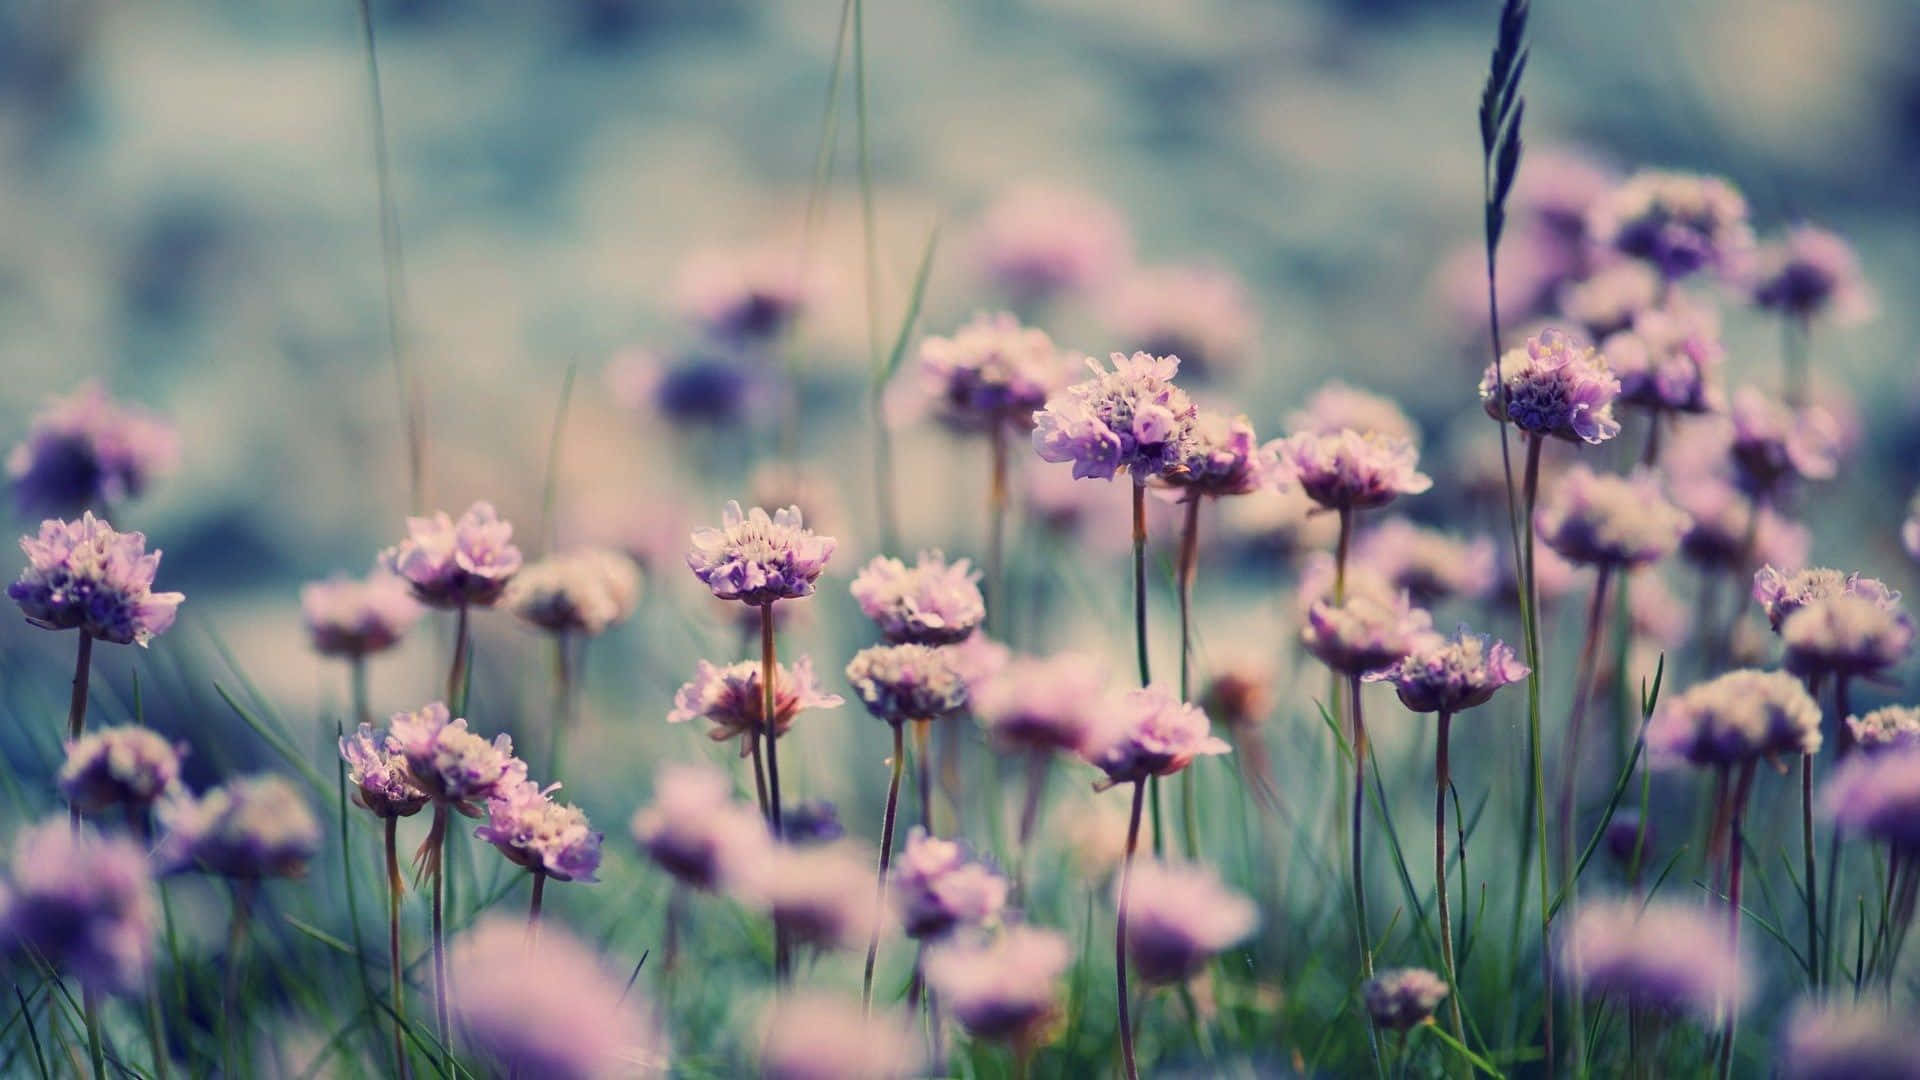 Stunning Floral Tumblr Wallpaper for Nature Lovers